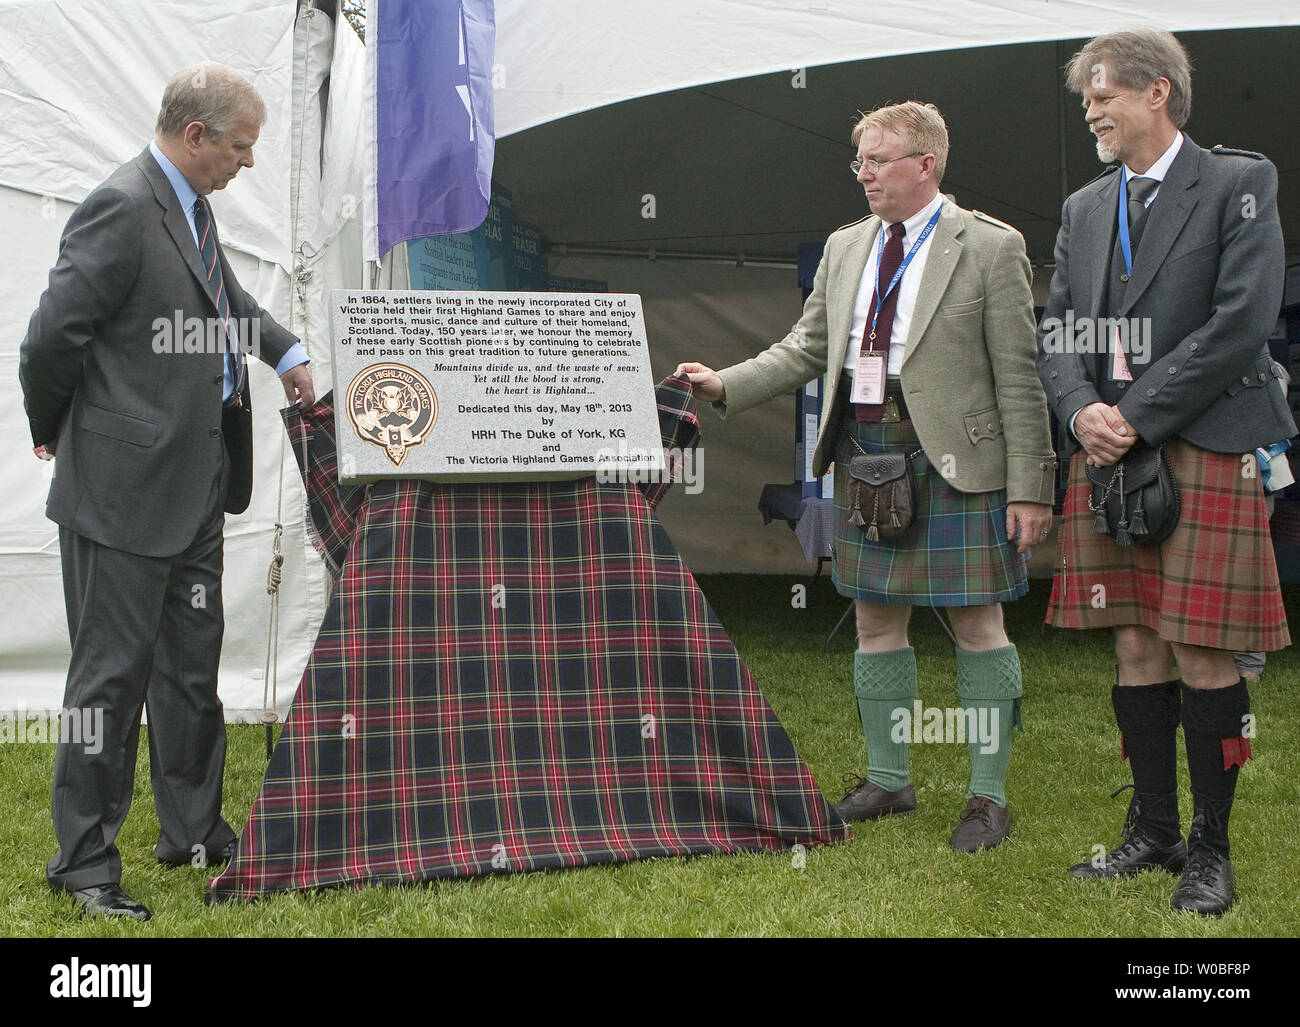 The Guest Of The Victoria Highland Games Association And Designated Chief Of The Games Prince Andrew Along With Association President Jim Maxwell Right And Board Member Randy Stewart Unveil A Plaque During